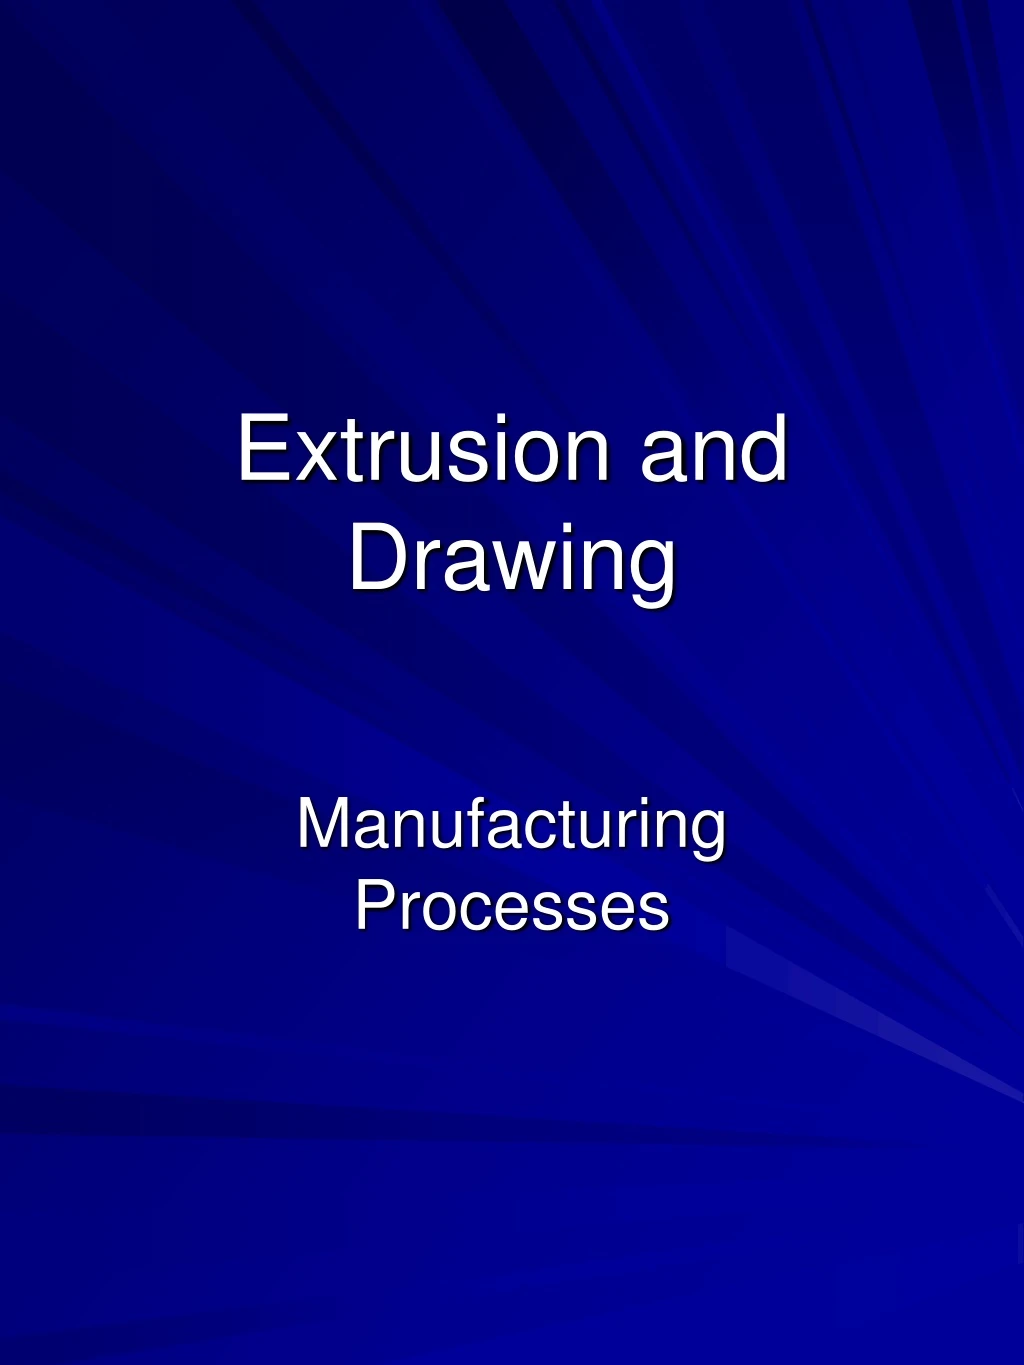 extrusion and drawing